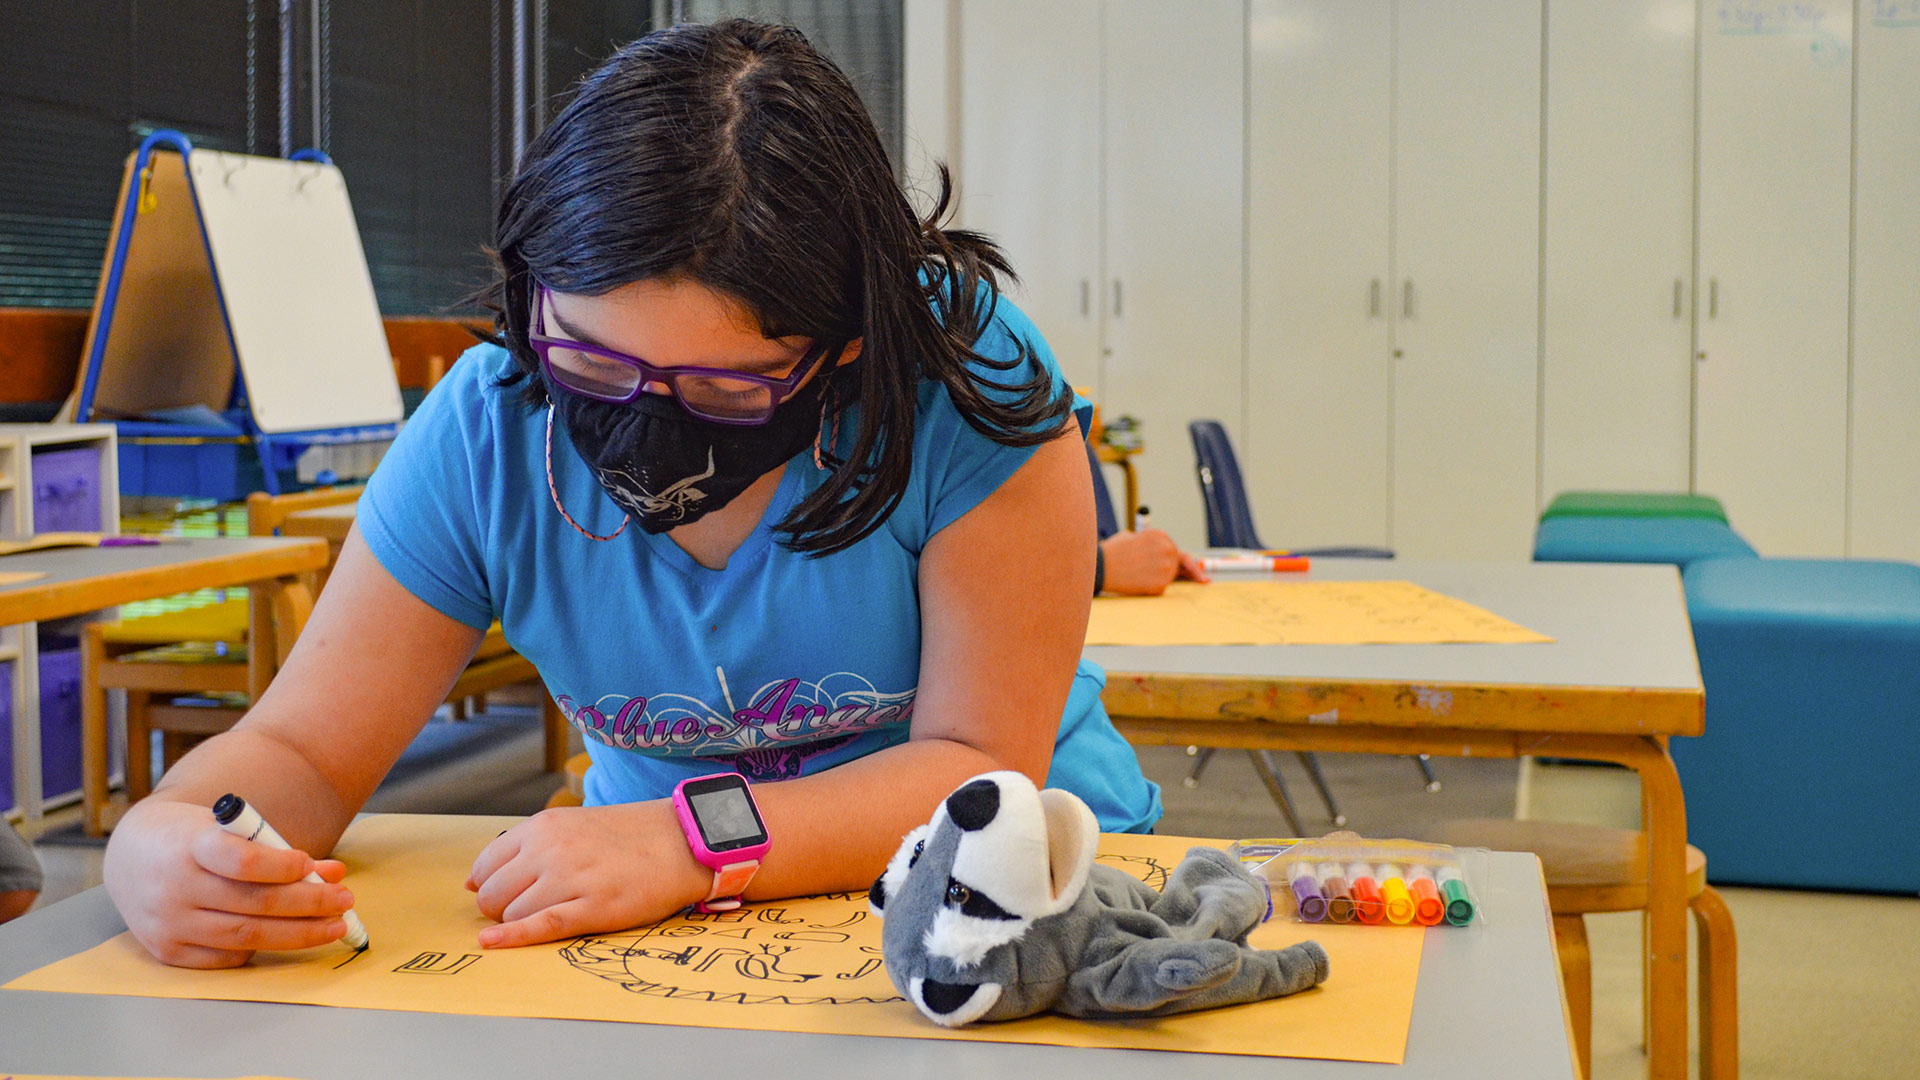 A masked student draws in an art classroom